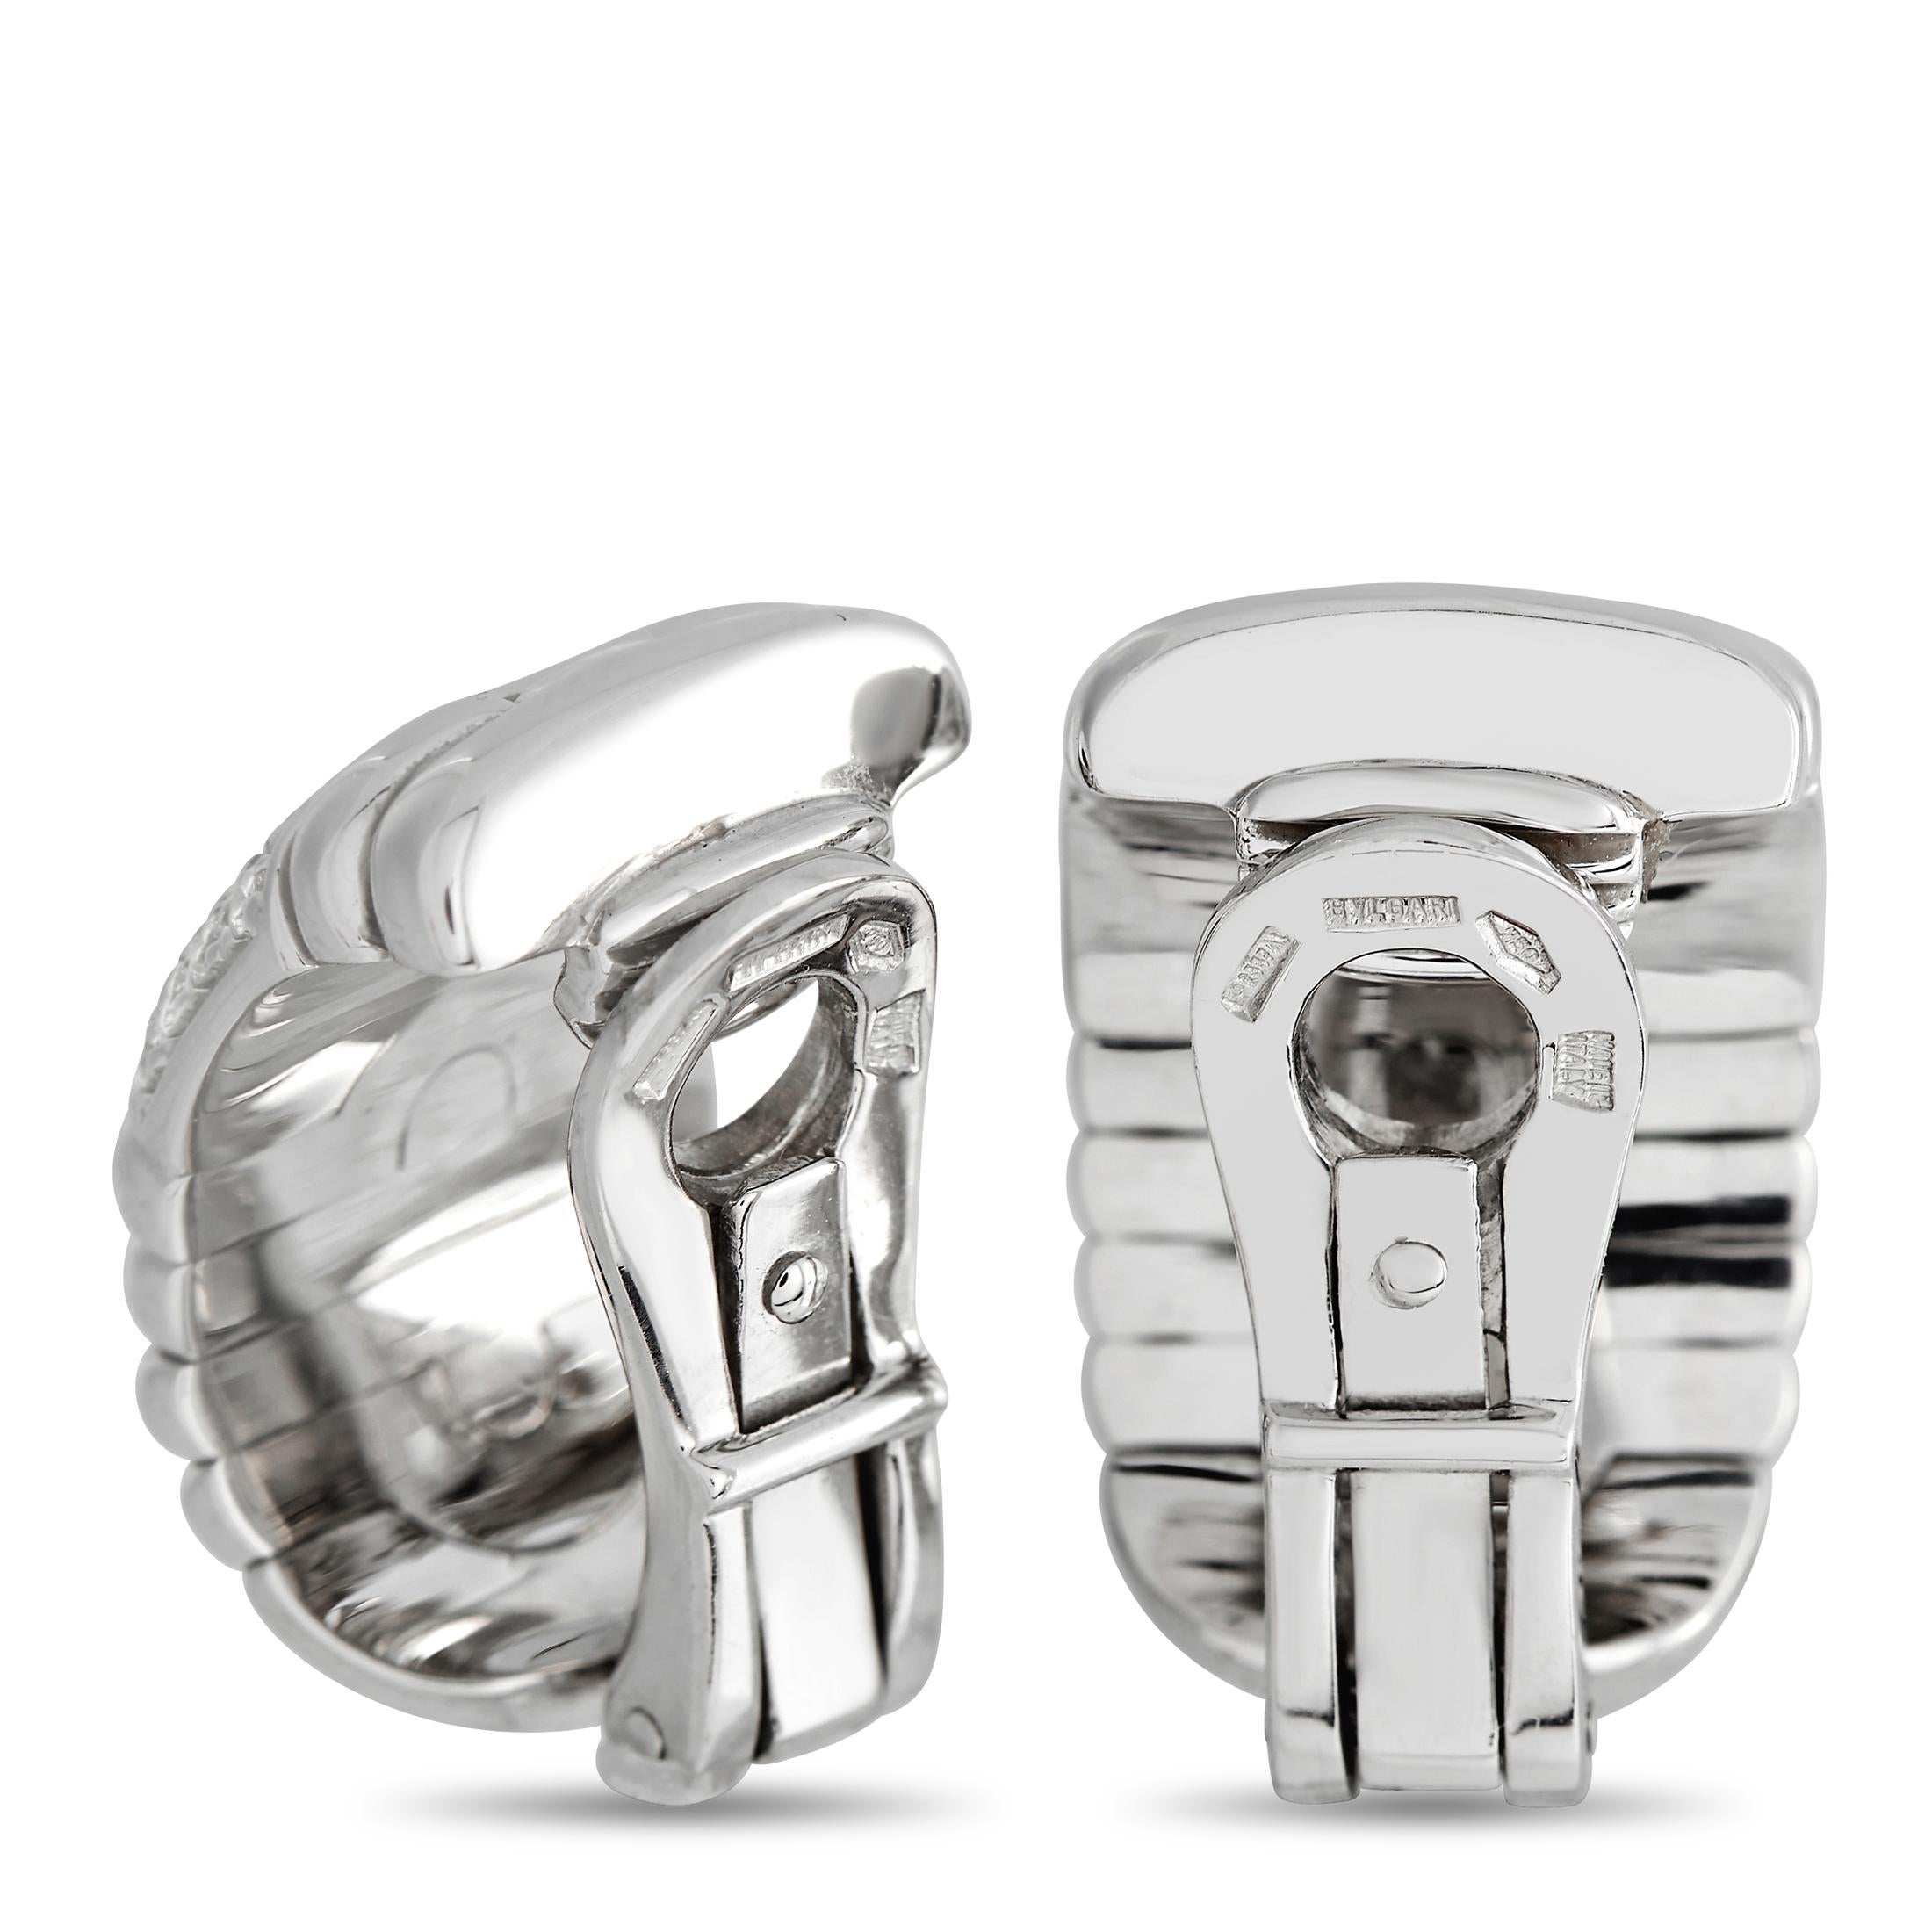 A bold 18K white gold setting makes these Bvlgari Parentesi earrings simply unforgettable. Curved lines are juxtaposed with inset diamonds totaling 0.50 carats on these sleek, understated earrings. Each one measures 0.75” long by 0.50” wide.  

This